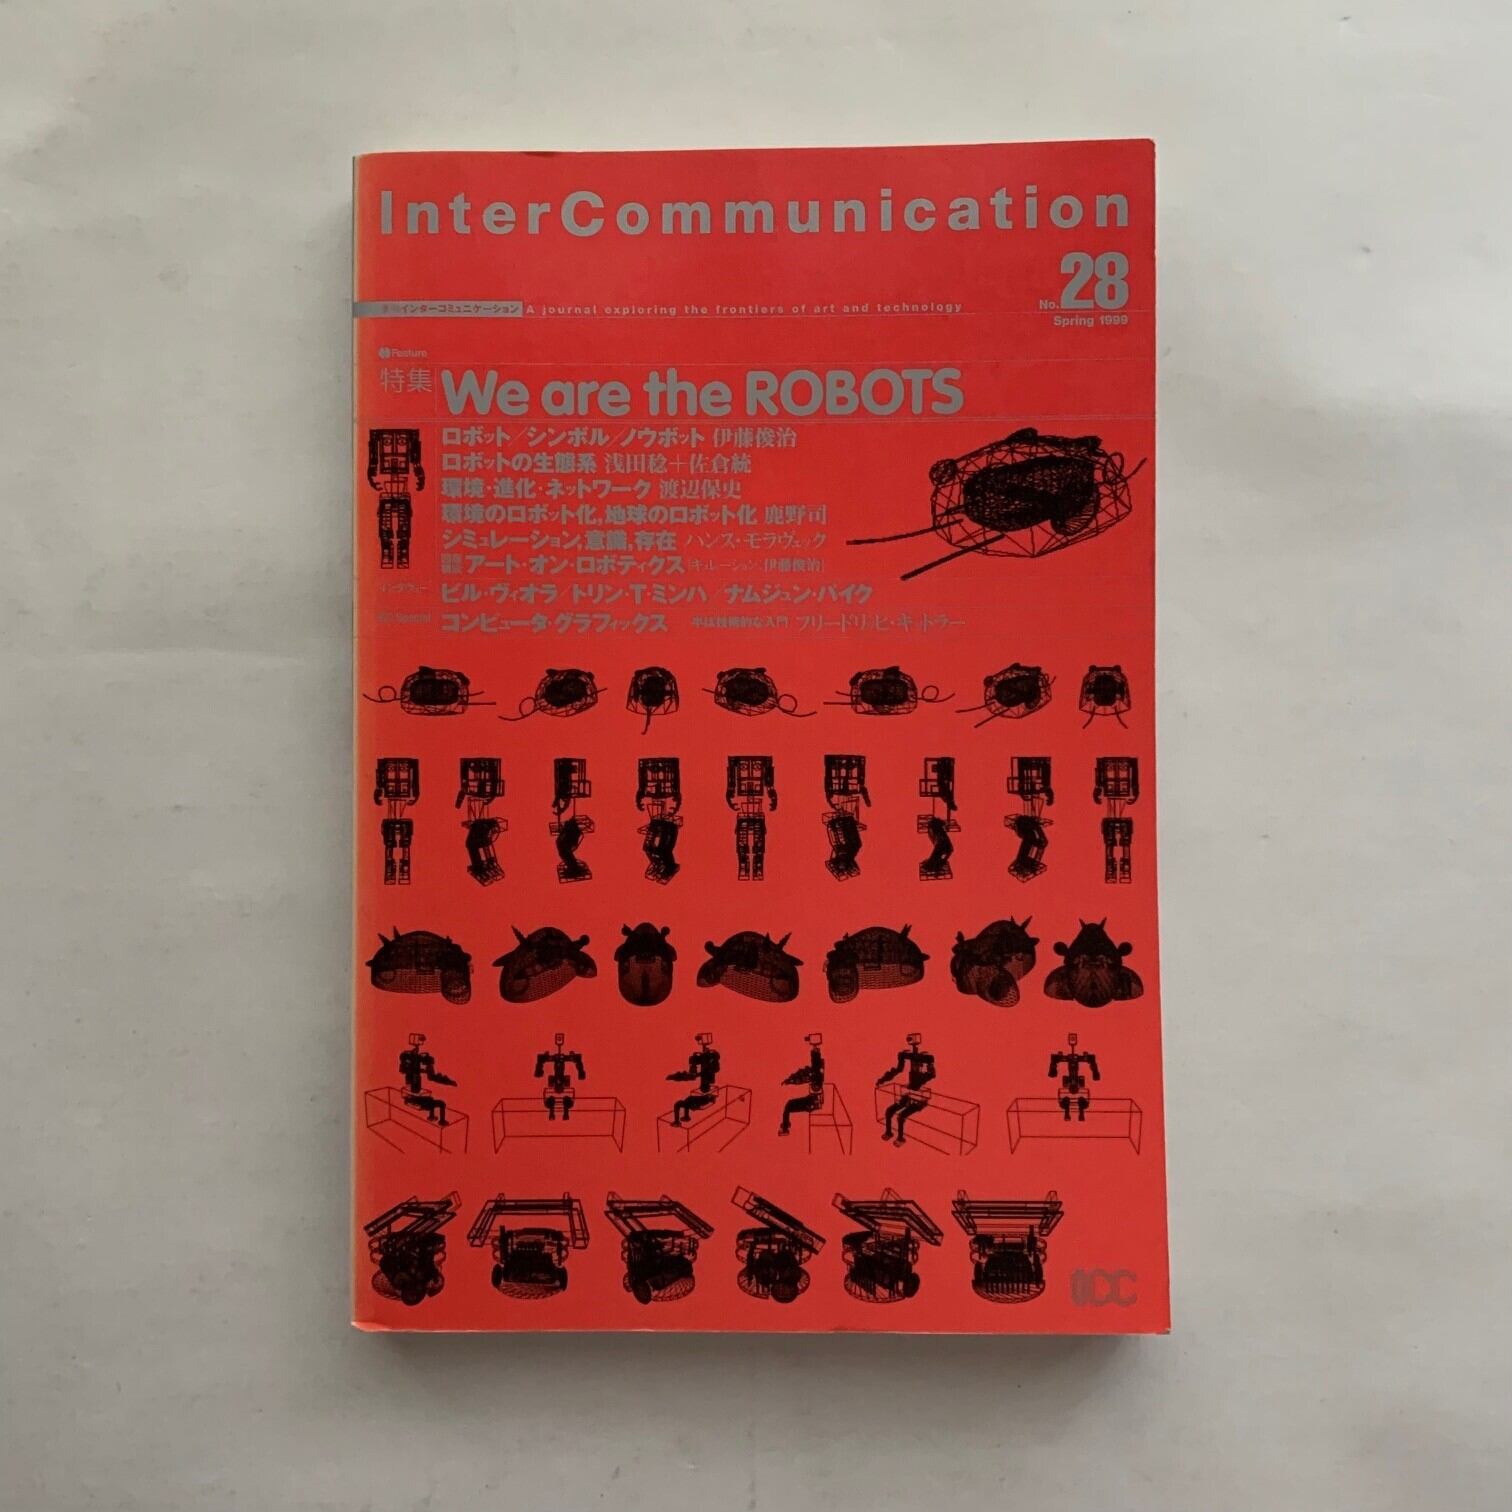 We are the BOROTS / Inter Communication No.28